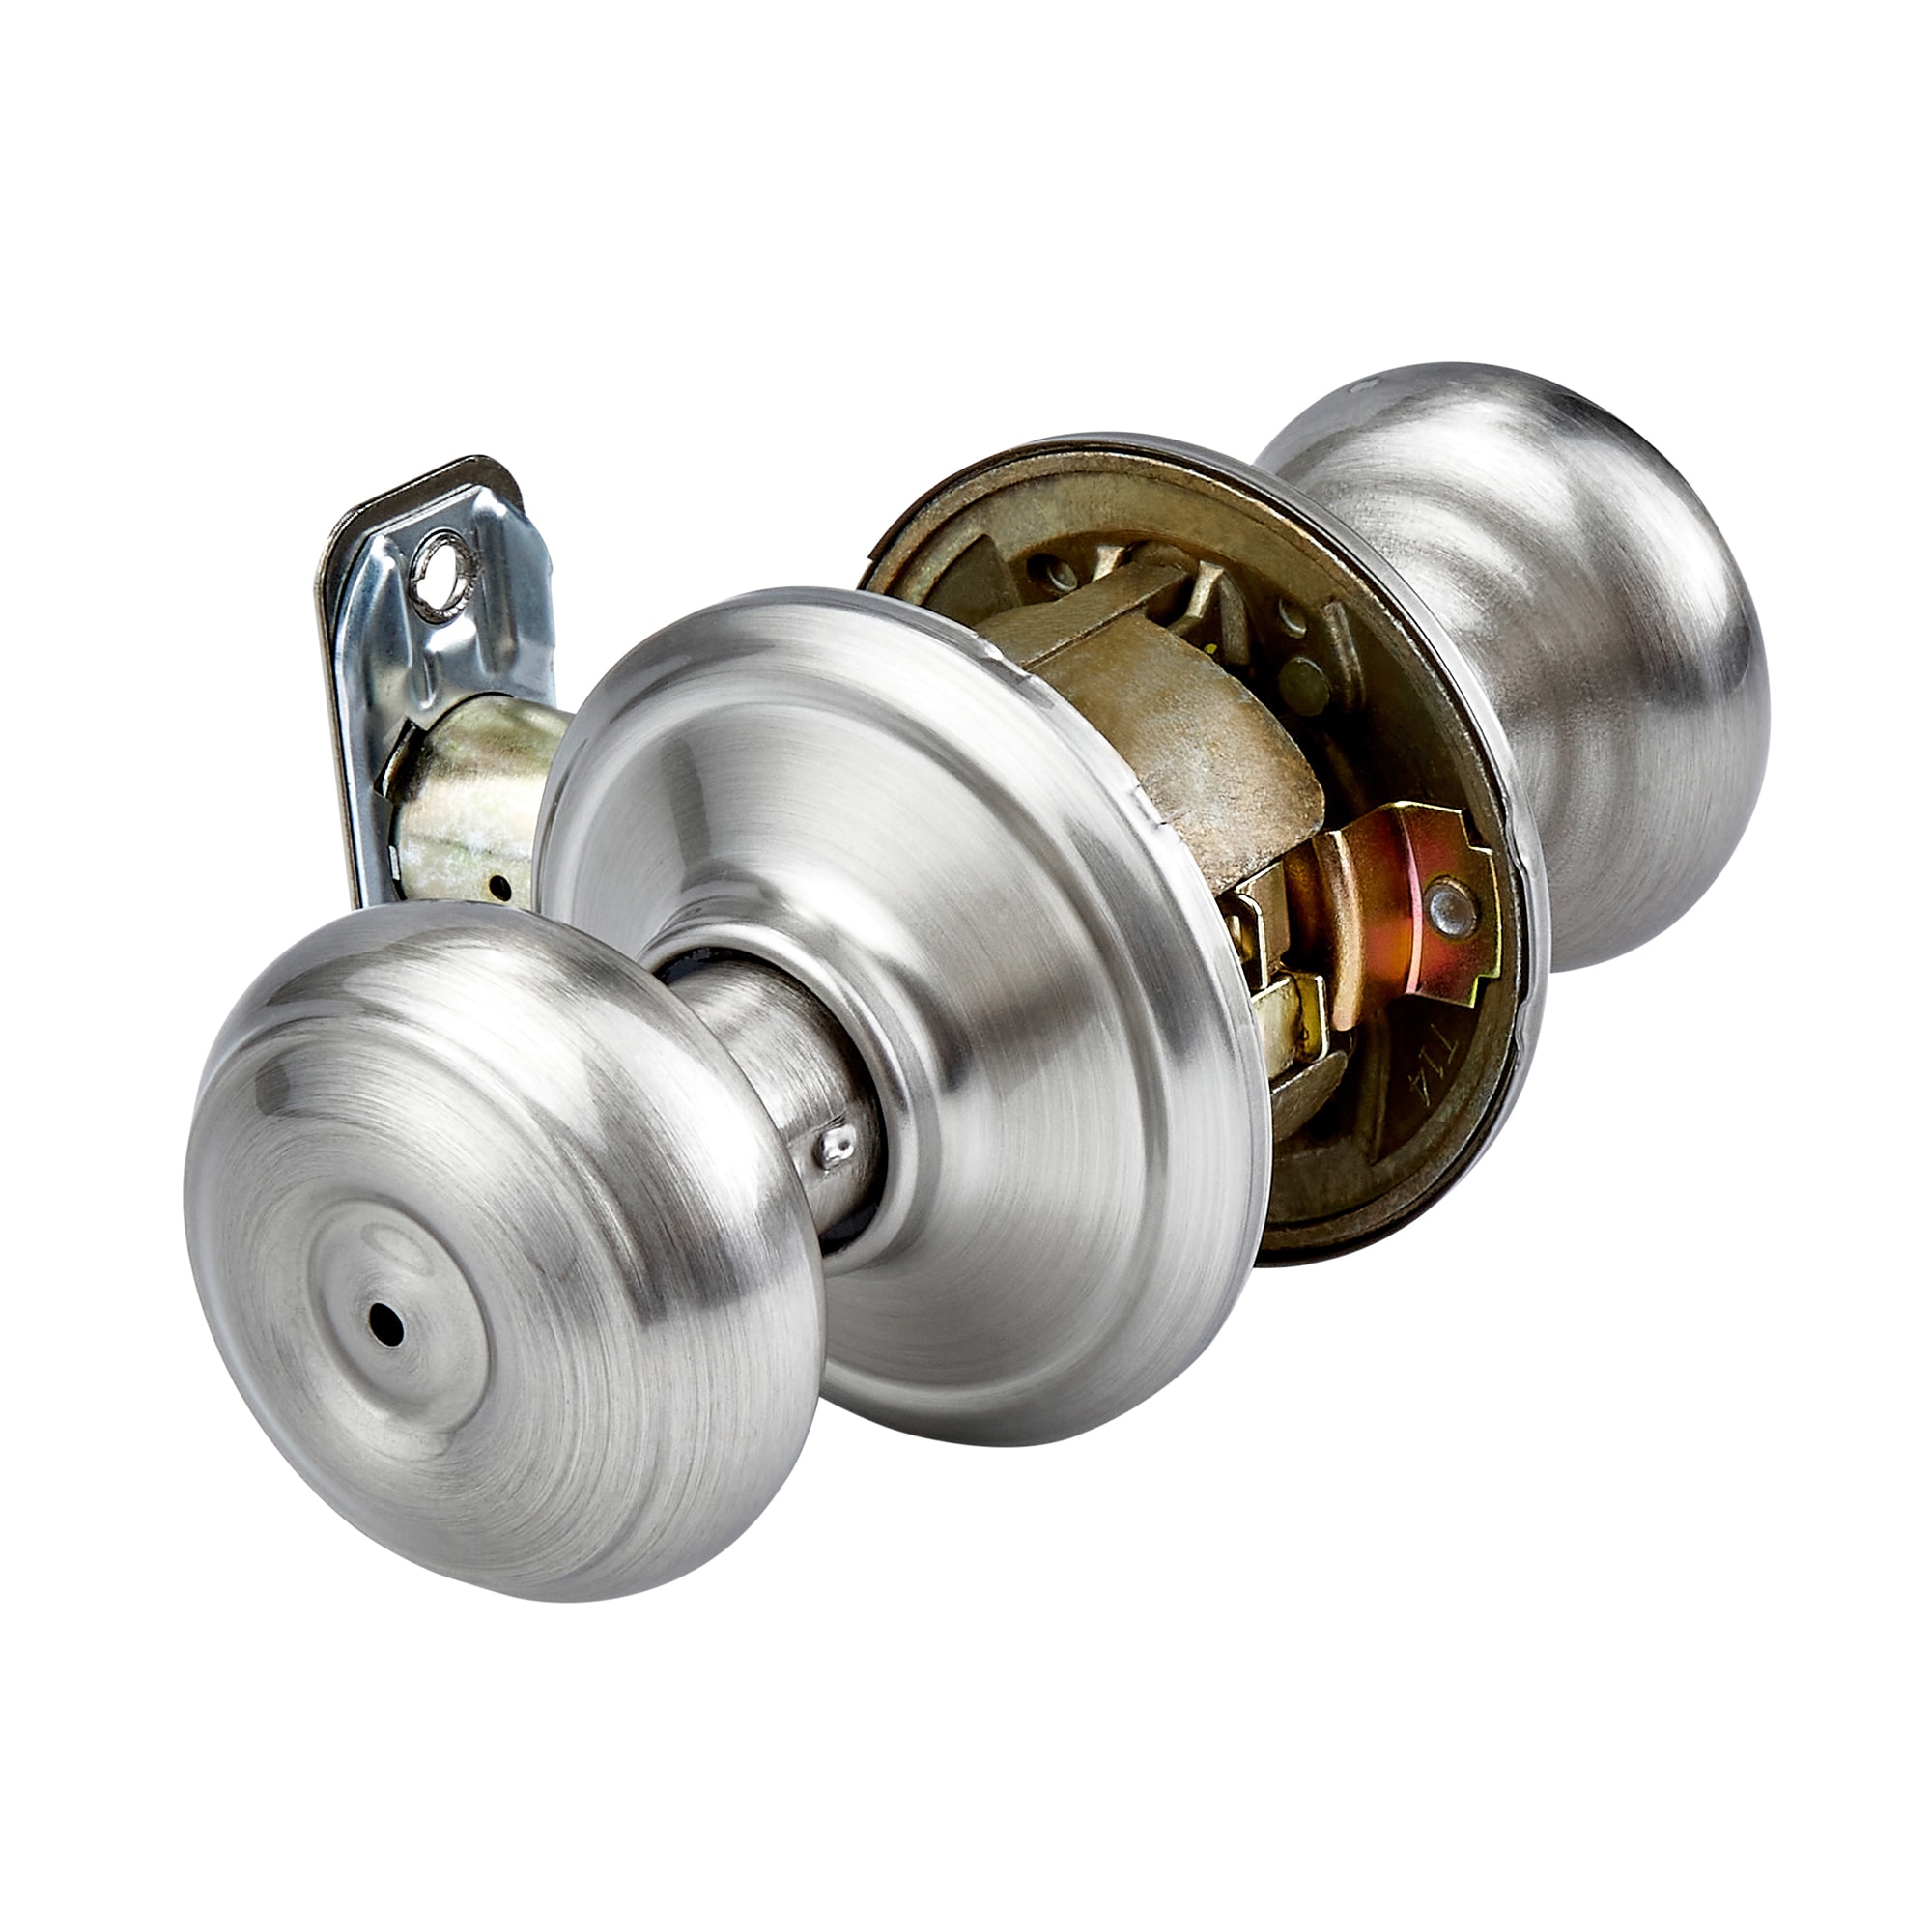 Kwikset 243 Tylo Entry Knob and Double Cylinder Deadbolt Project Pack in Antique Brass - 4